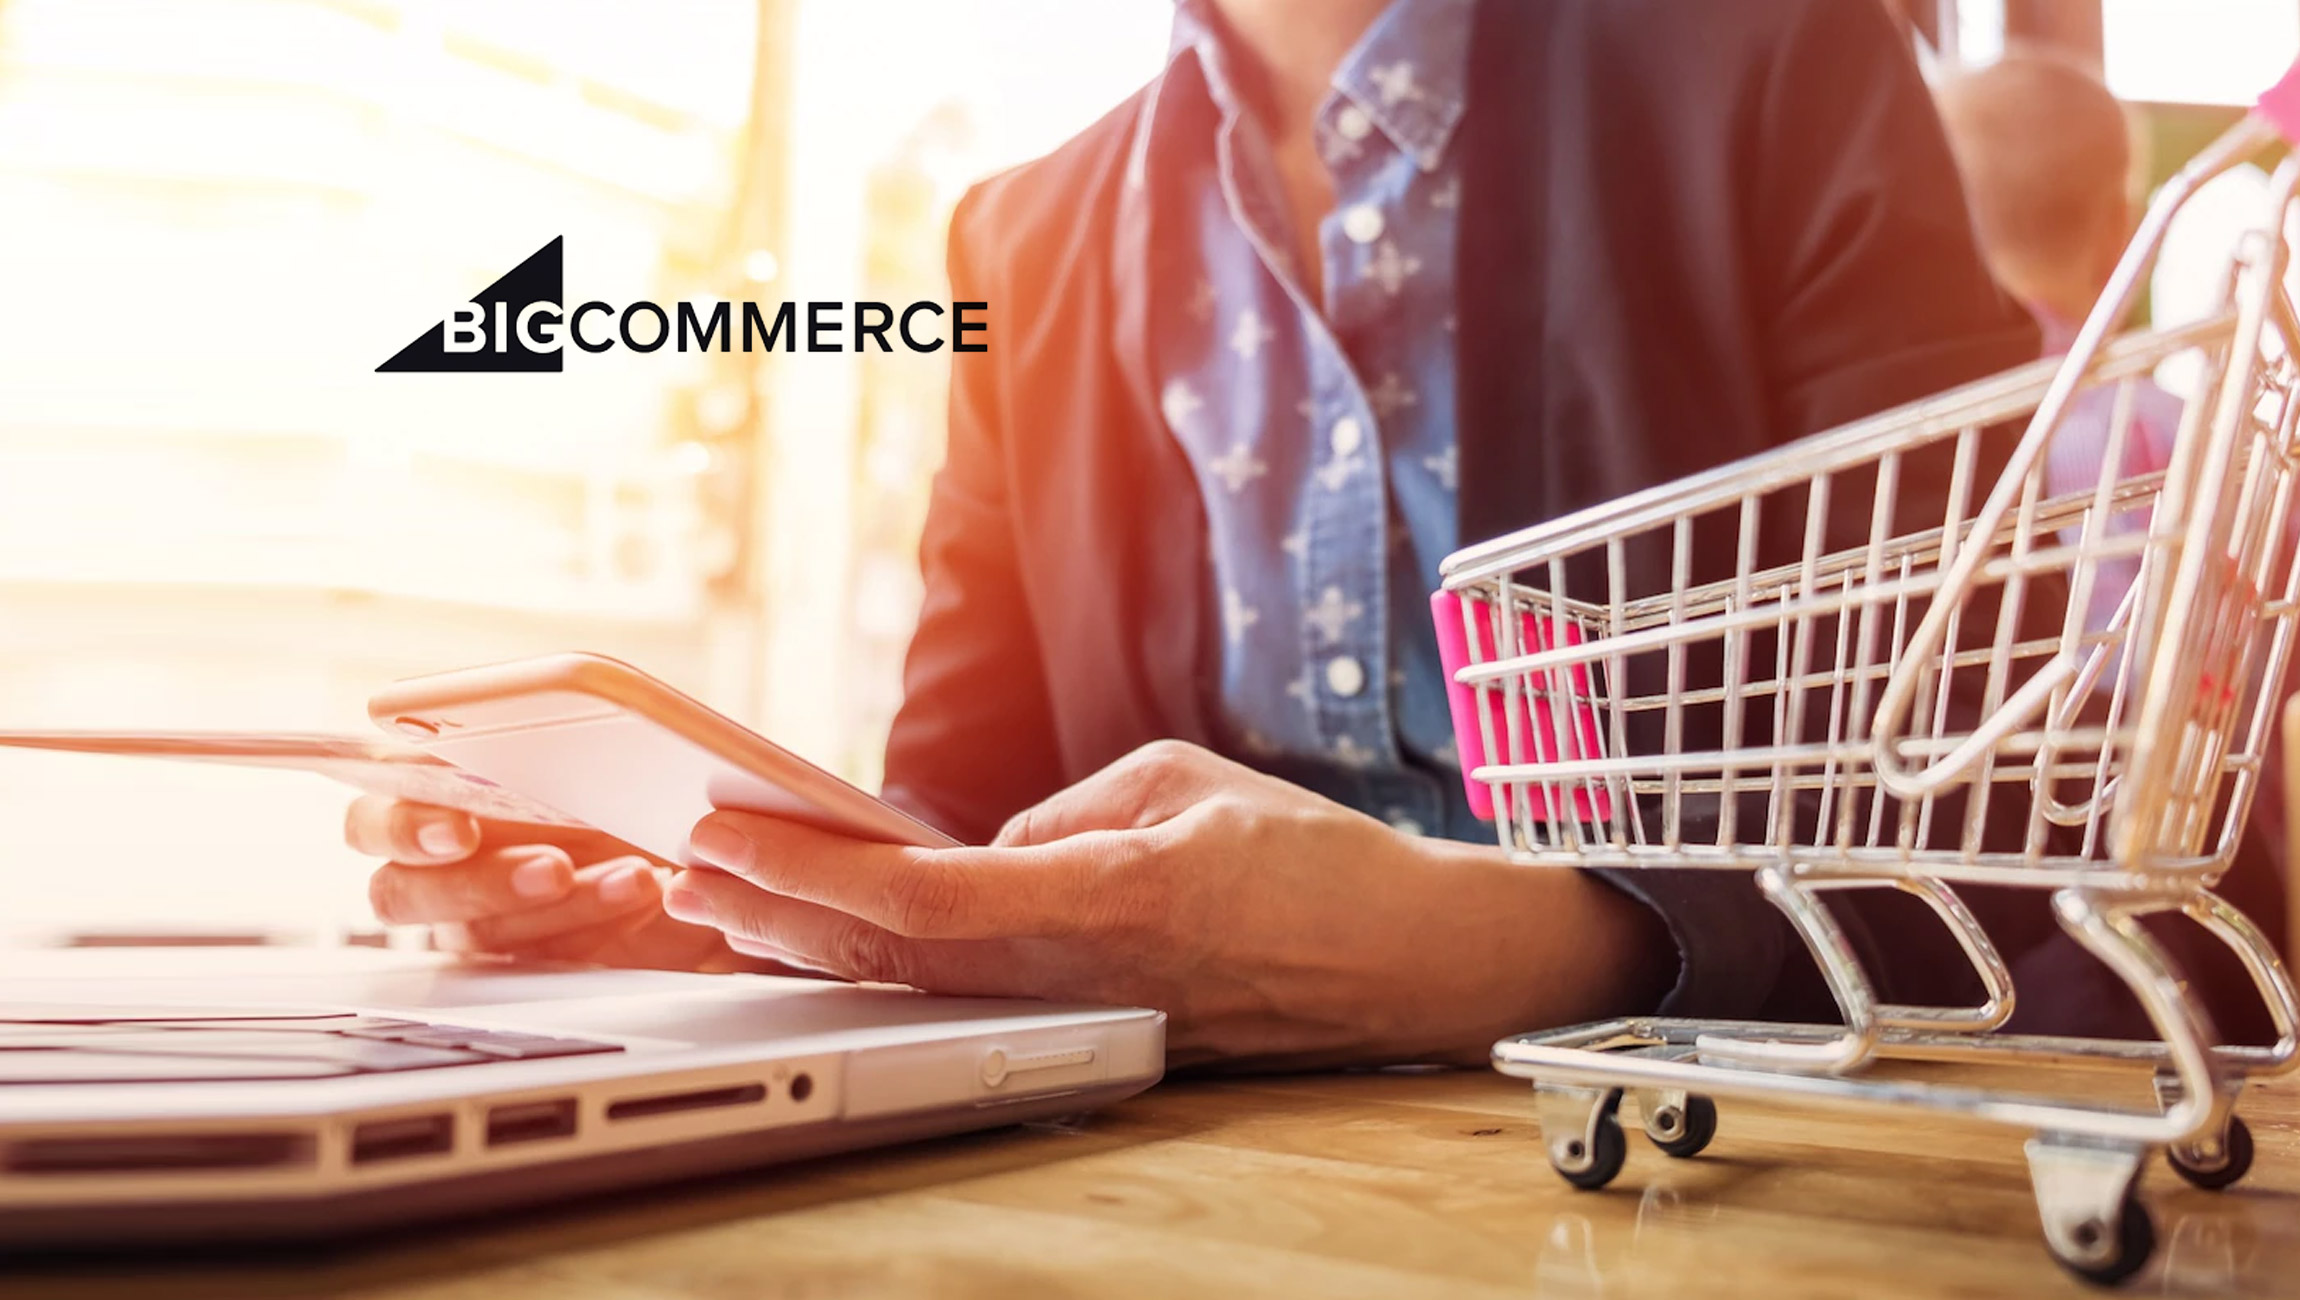 BigCommerce Unlocks Business Opportunities for Partners to Generate New Revenue Streams